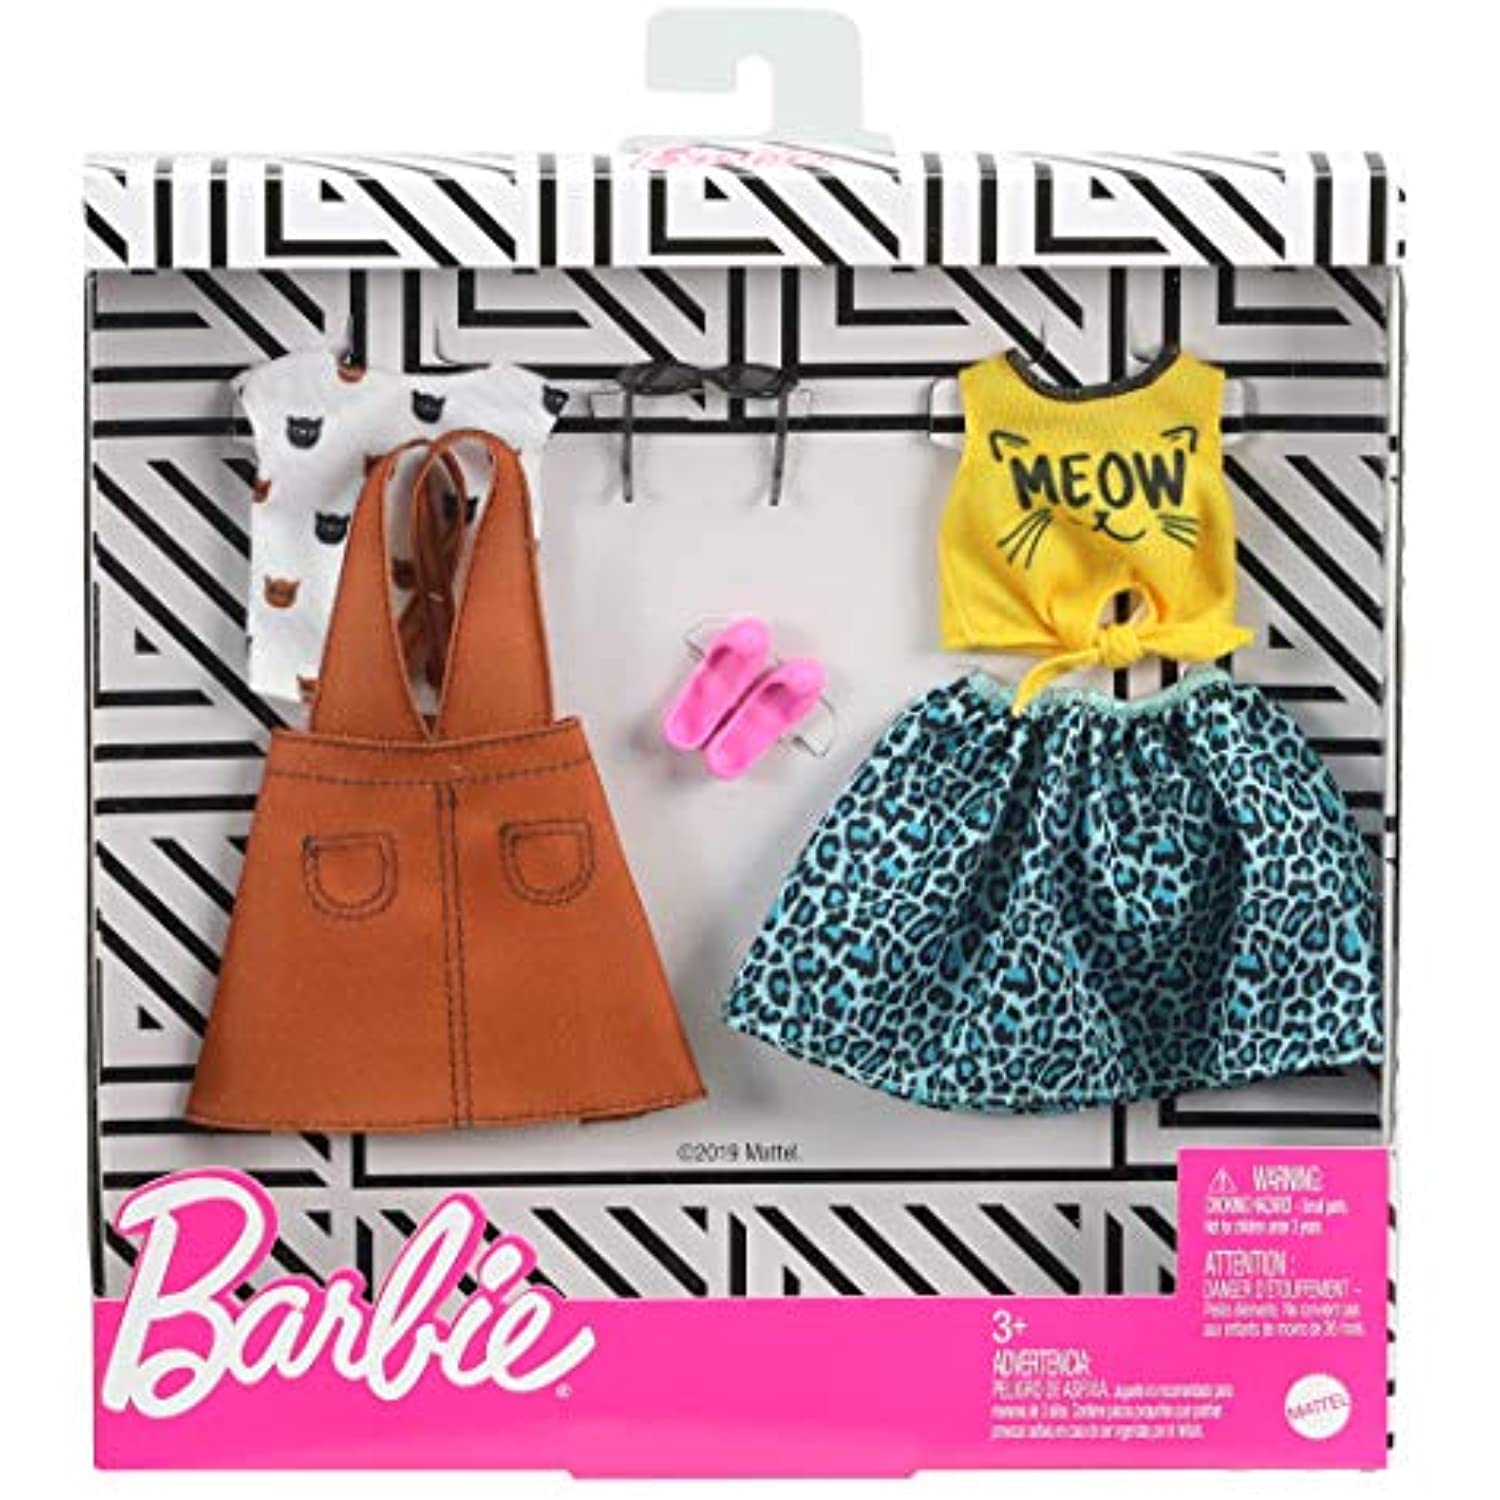 Barbie Fashions 2-Pack Clothing Set, 2 Outfits Doll Include White Tee with Kitty Print, Yellow Meow Tie Shirt, Orange Jumper, Blue Animal-Print Skirt & 2 Accessories